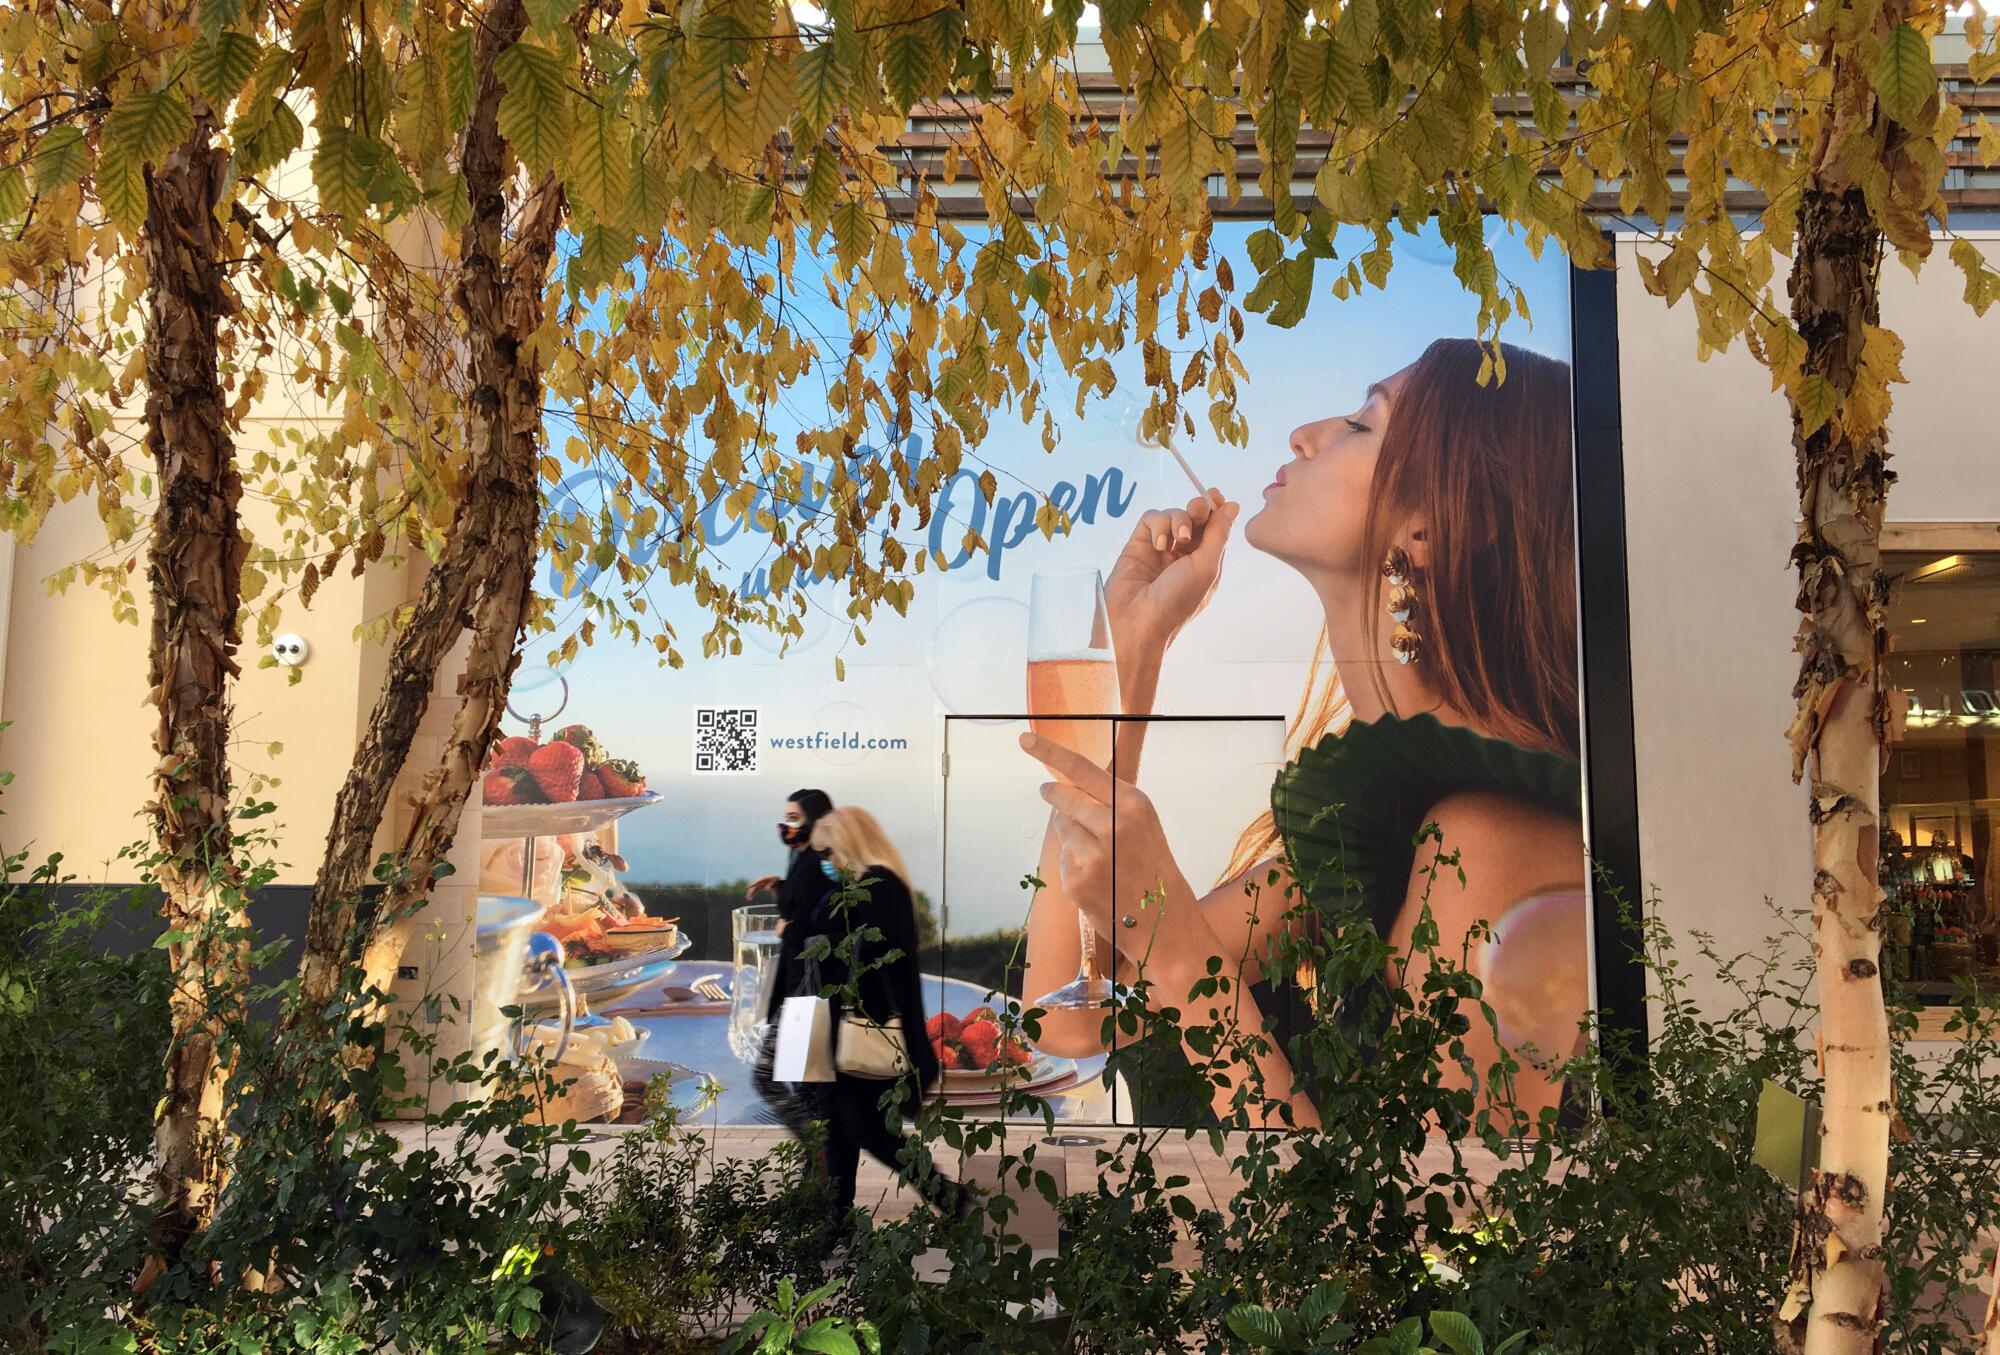 Shoppers in masks walk past an advertising poster of a woman drinking from a champagne flute and blowing bubbles.